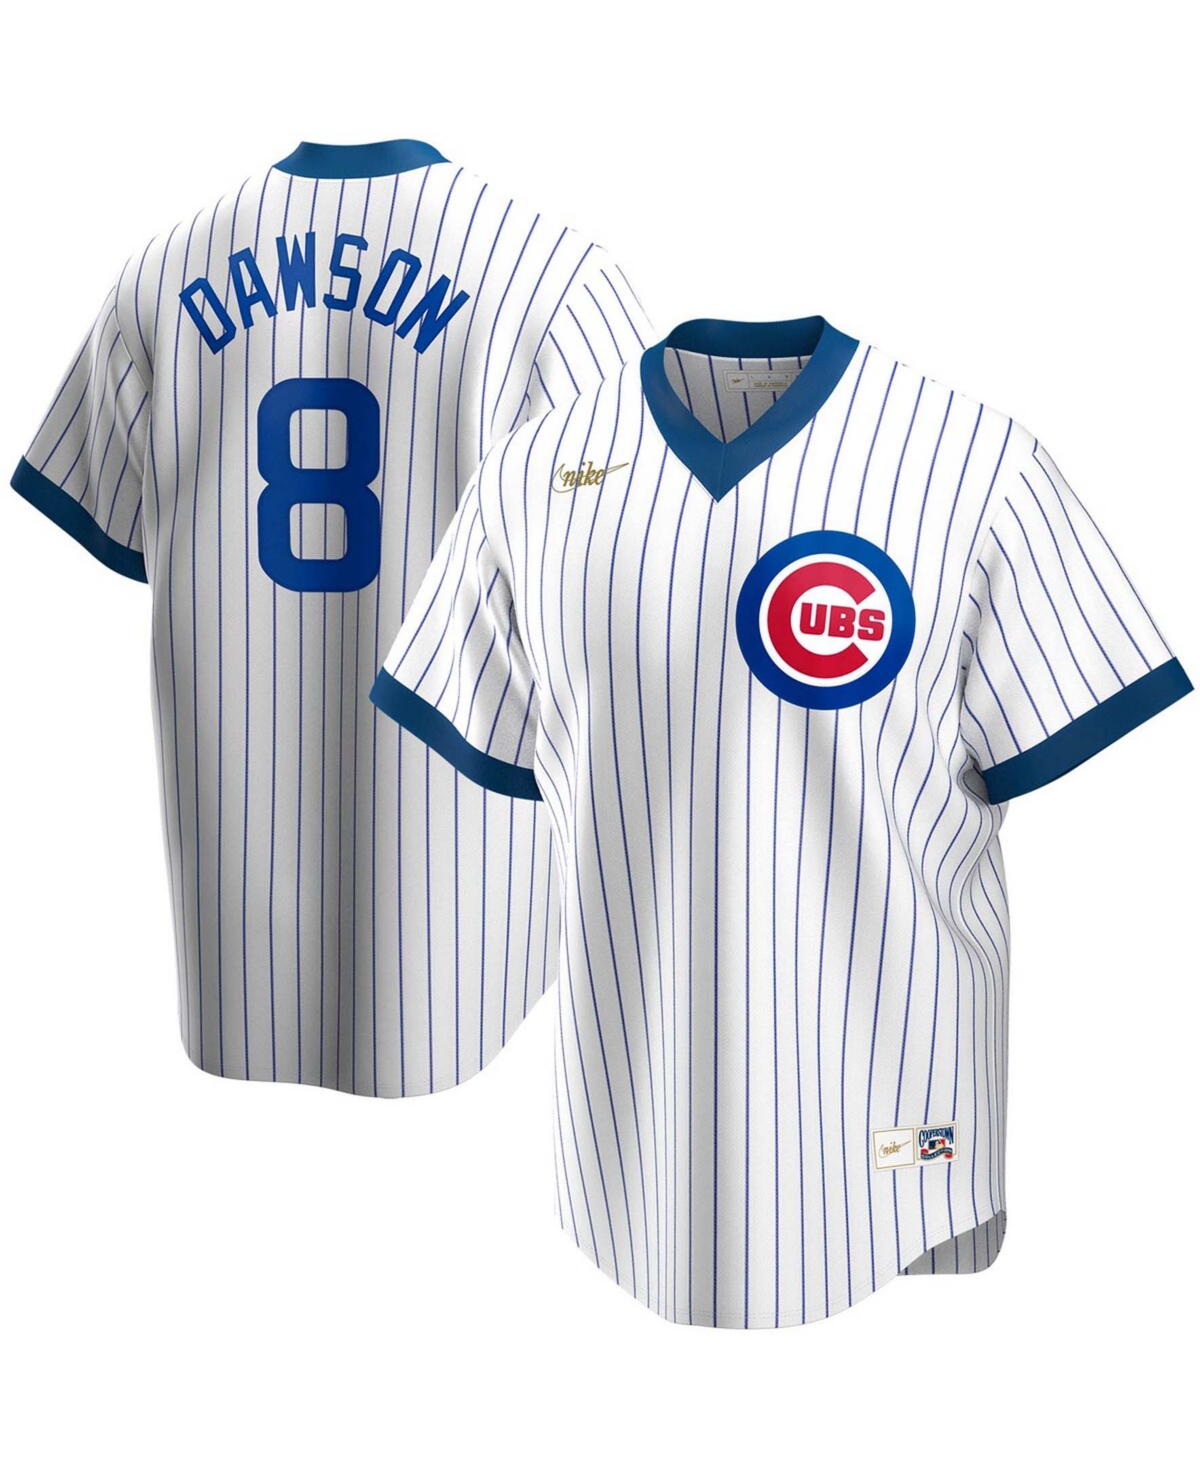 Ryne Sandberg Chicago Cubs Nike Home Cooperstown Collection Player Jersey -  White